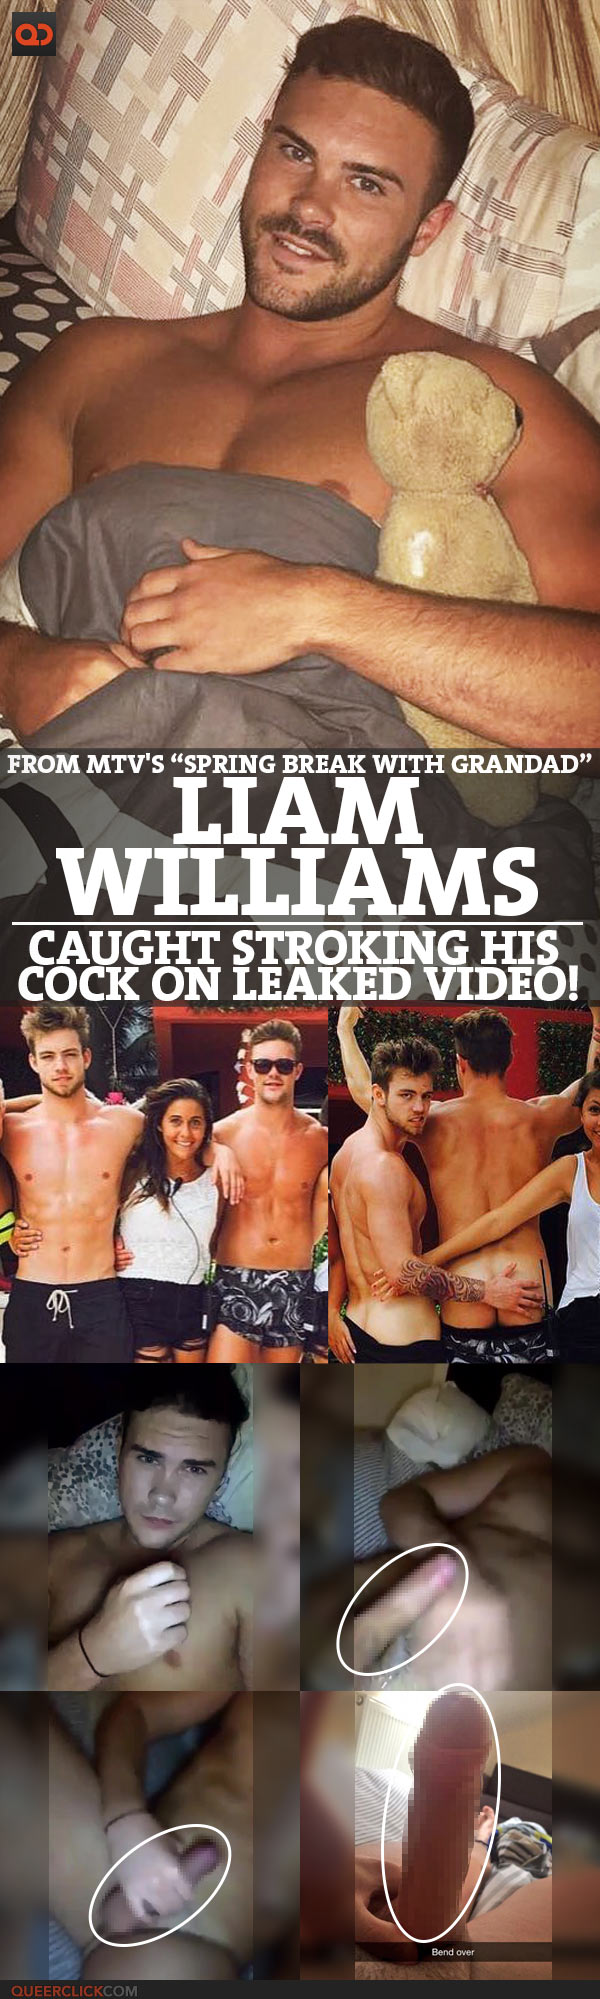 Liam William, From MTV's “Spring Break With Grandad”, Caught Stroking His Cock On Leaked Video!